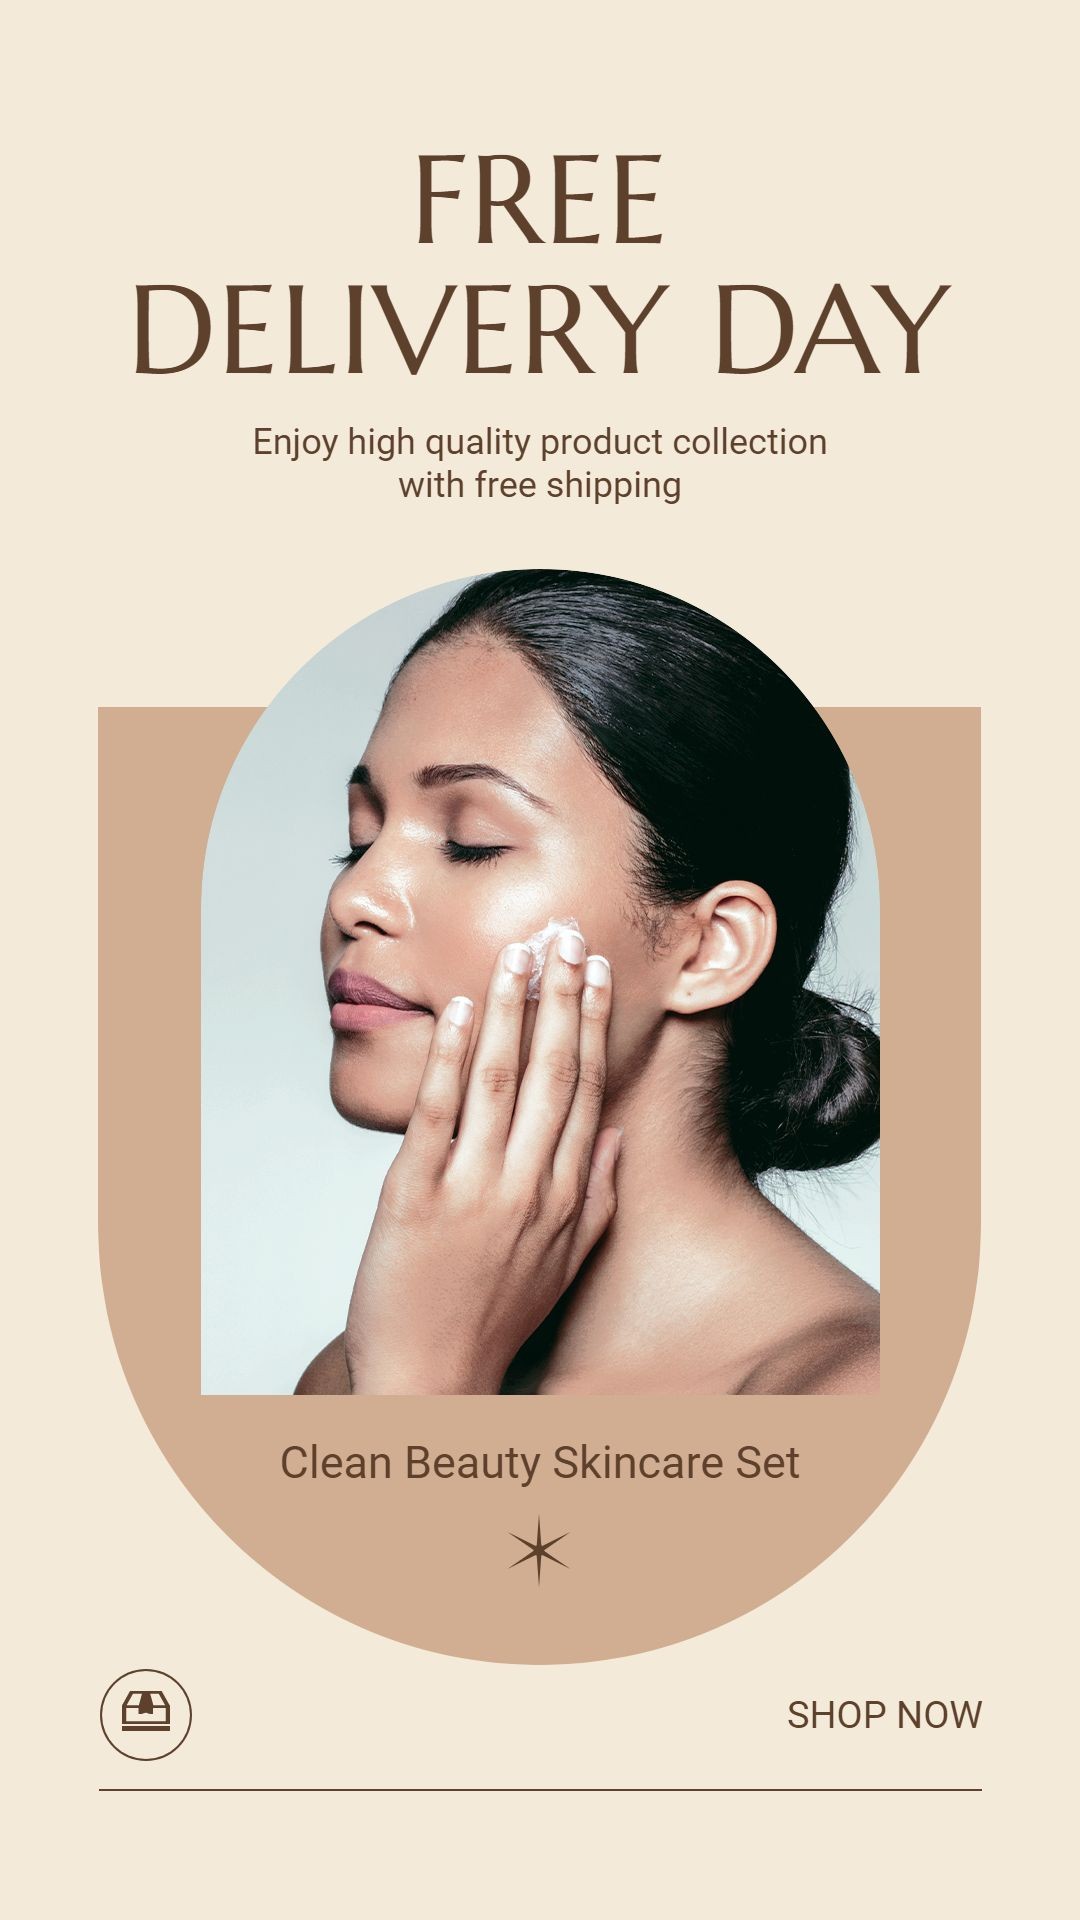 Free Delivery Day Skincare Cosmetics Sale Promotion Ecommerce Story预览效果